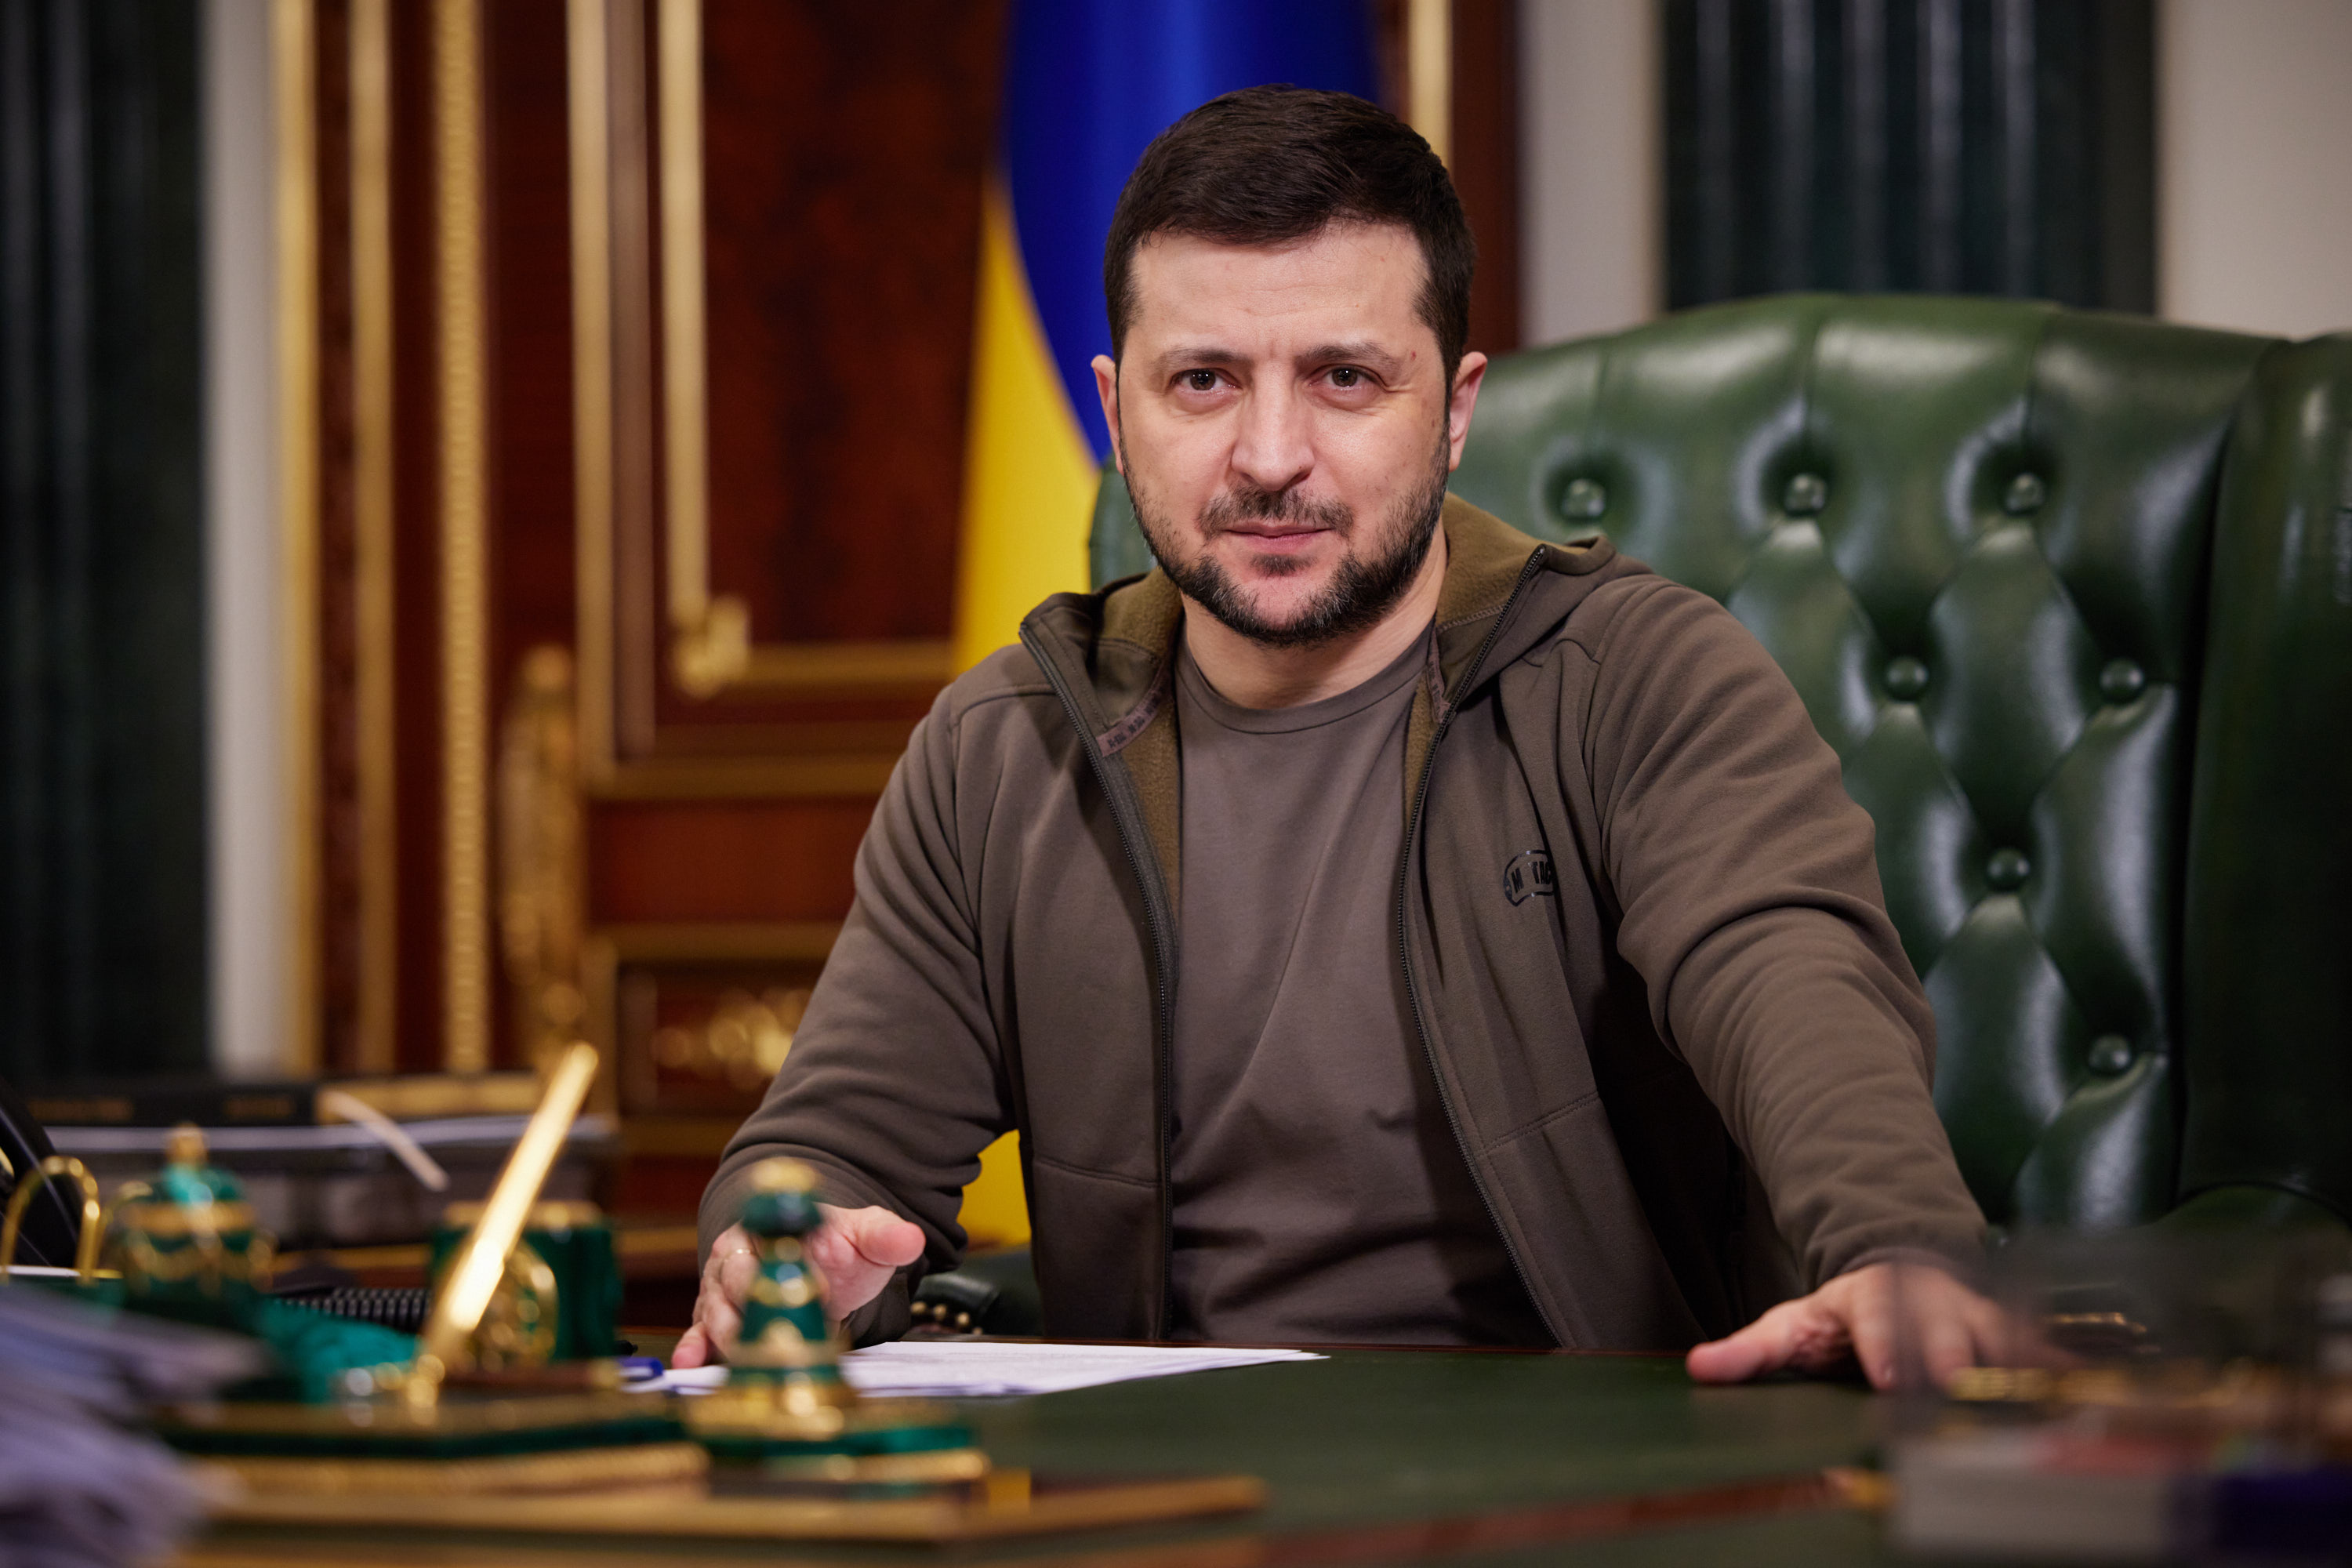 March 15, 2022. Photo: Official website of the President of Ukraine